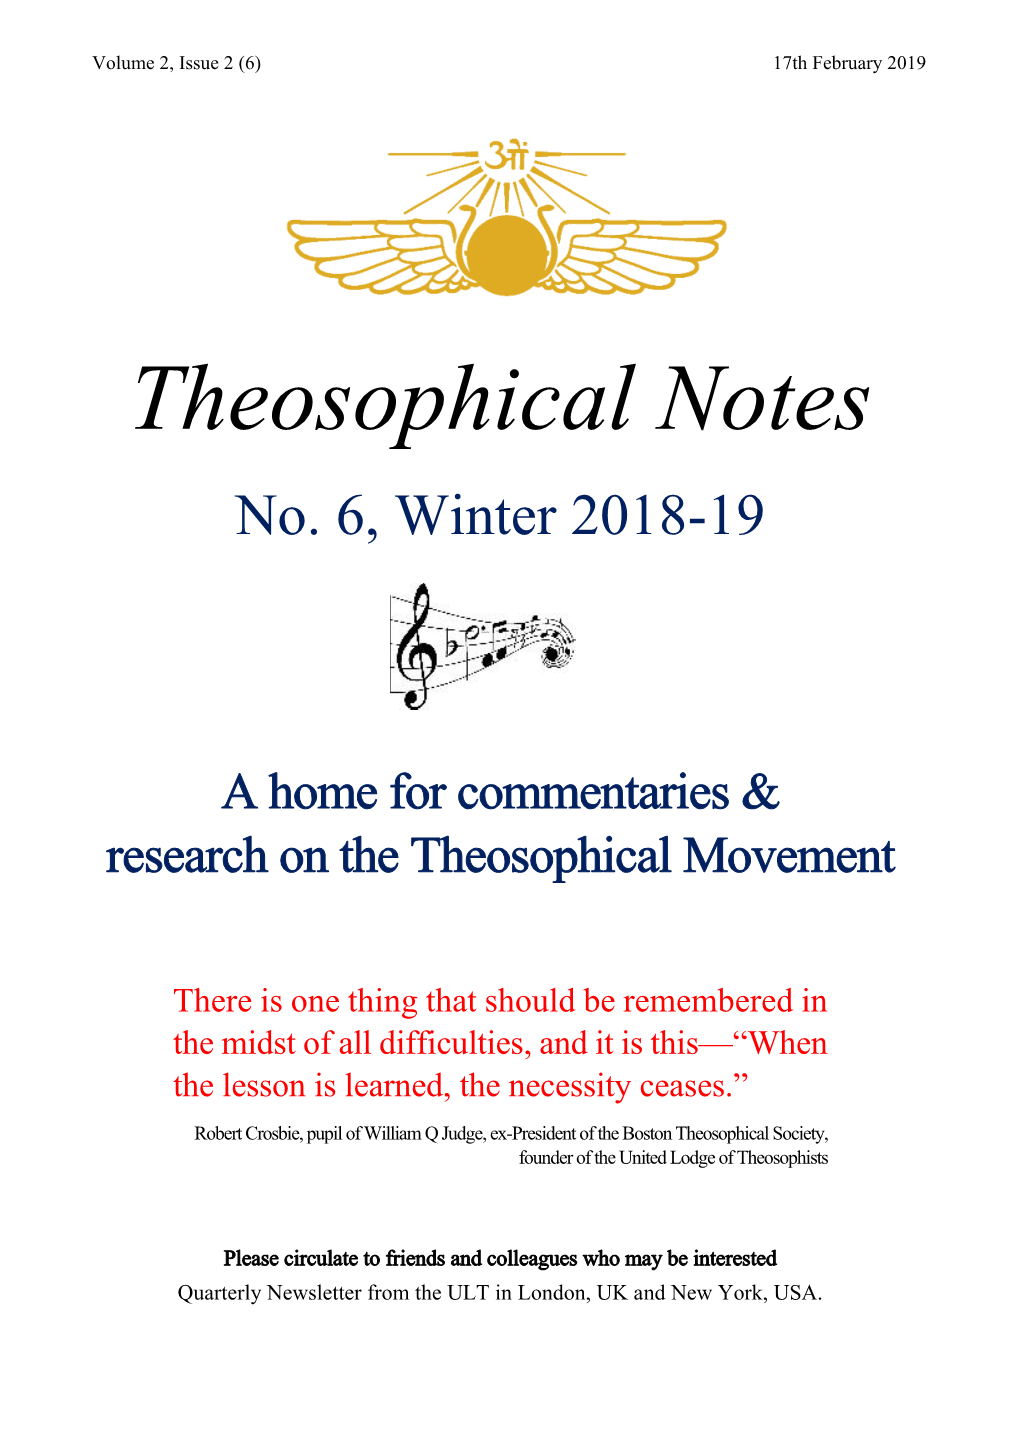 Theosophical Notes No. 6 Winter 2018-19